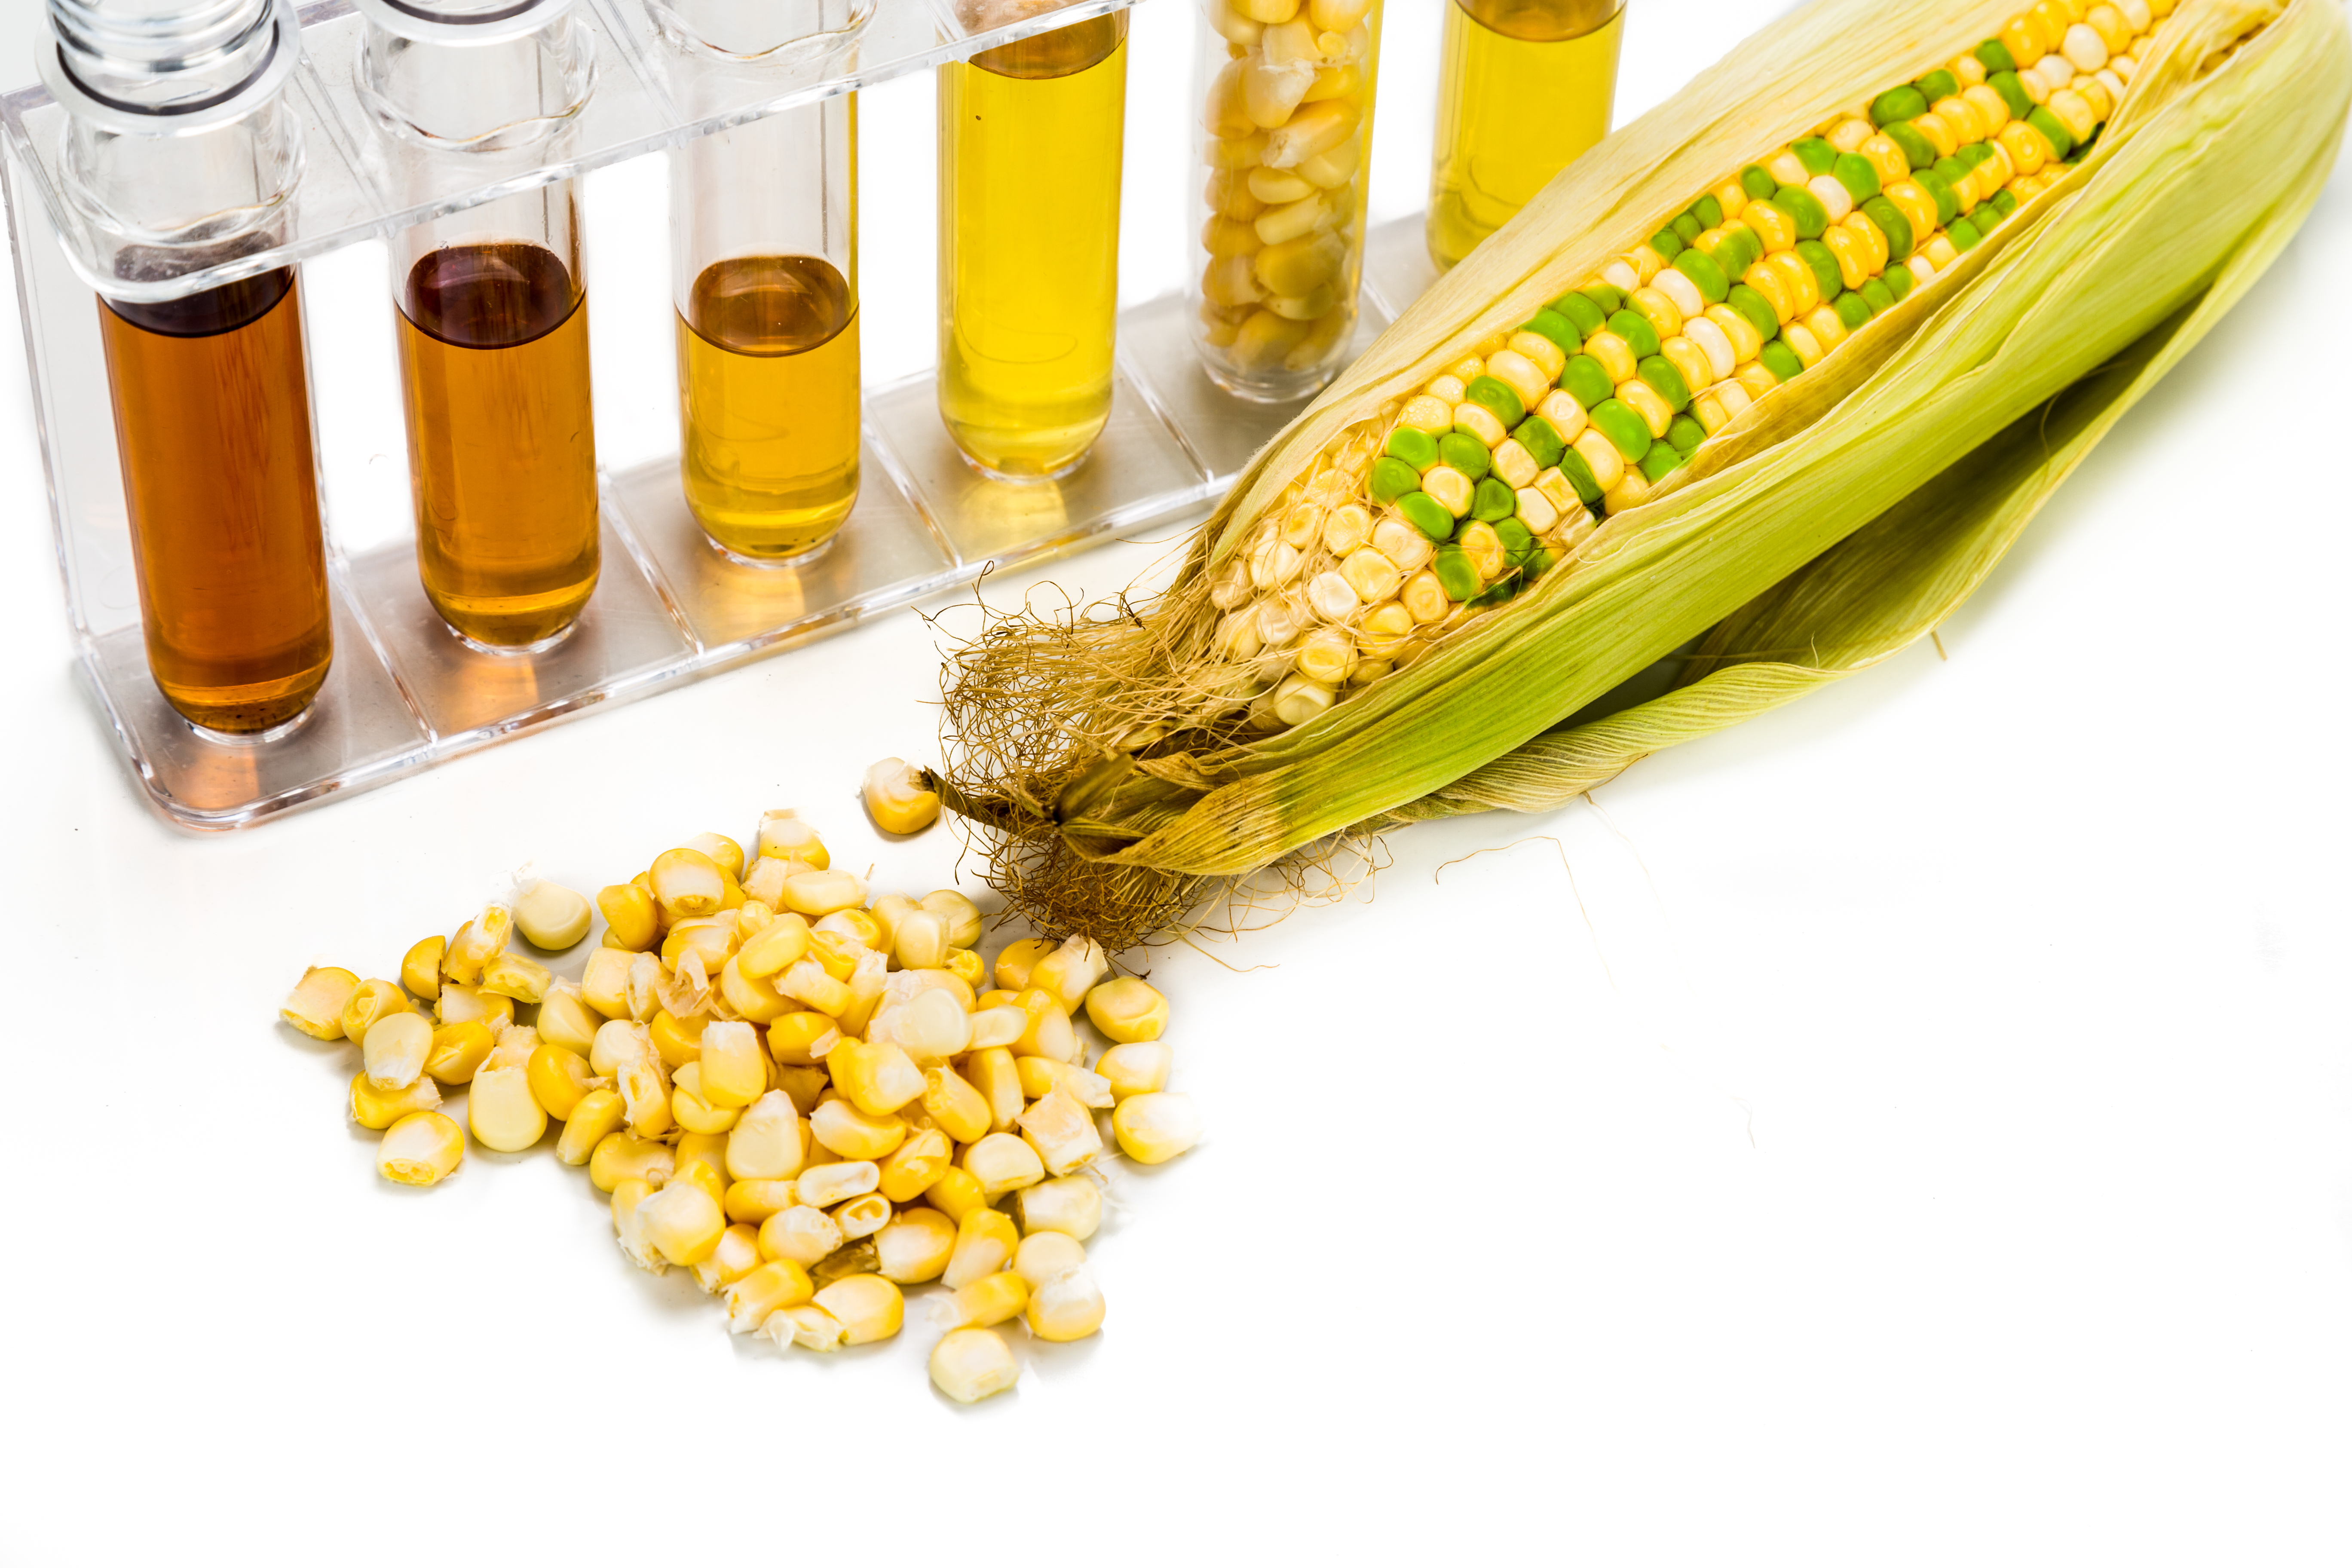 Corn generated ethanol in test tubes